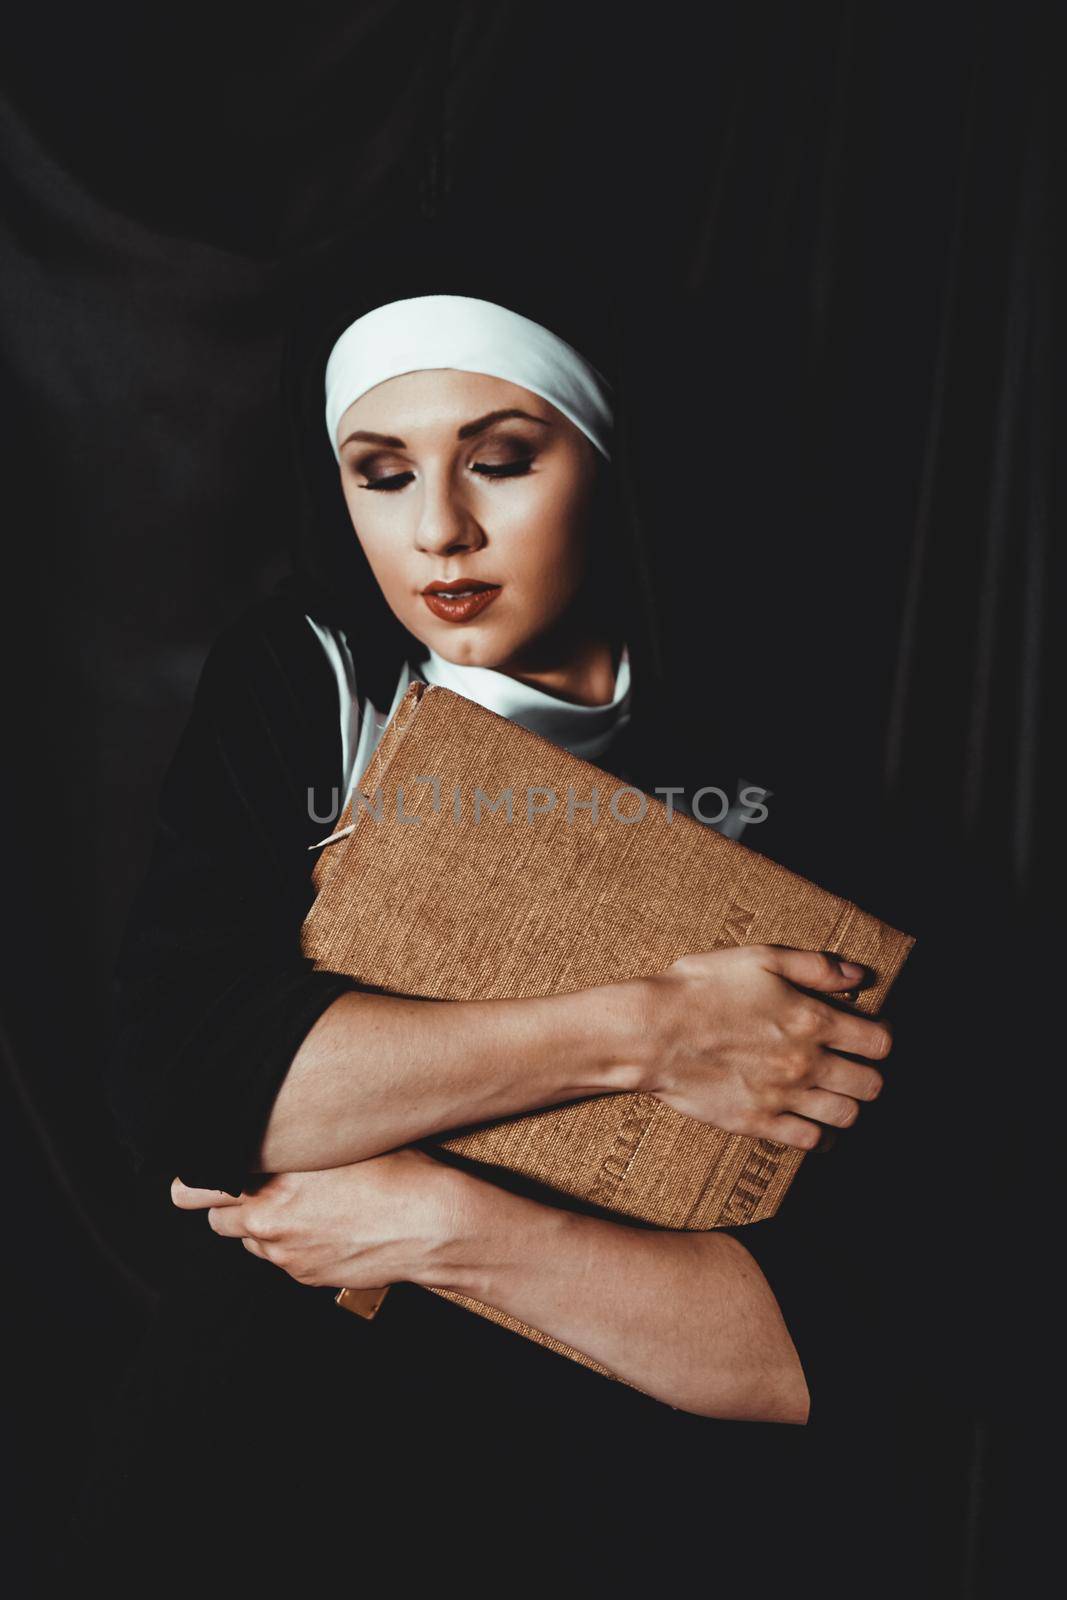 Beautiful young nun in religion black suit holds Bible and posing on camera with big book on a black background. Religion concept.